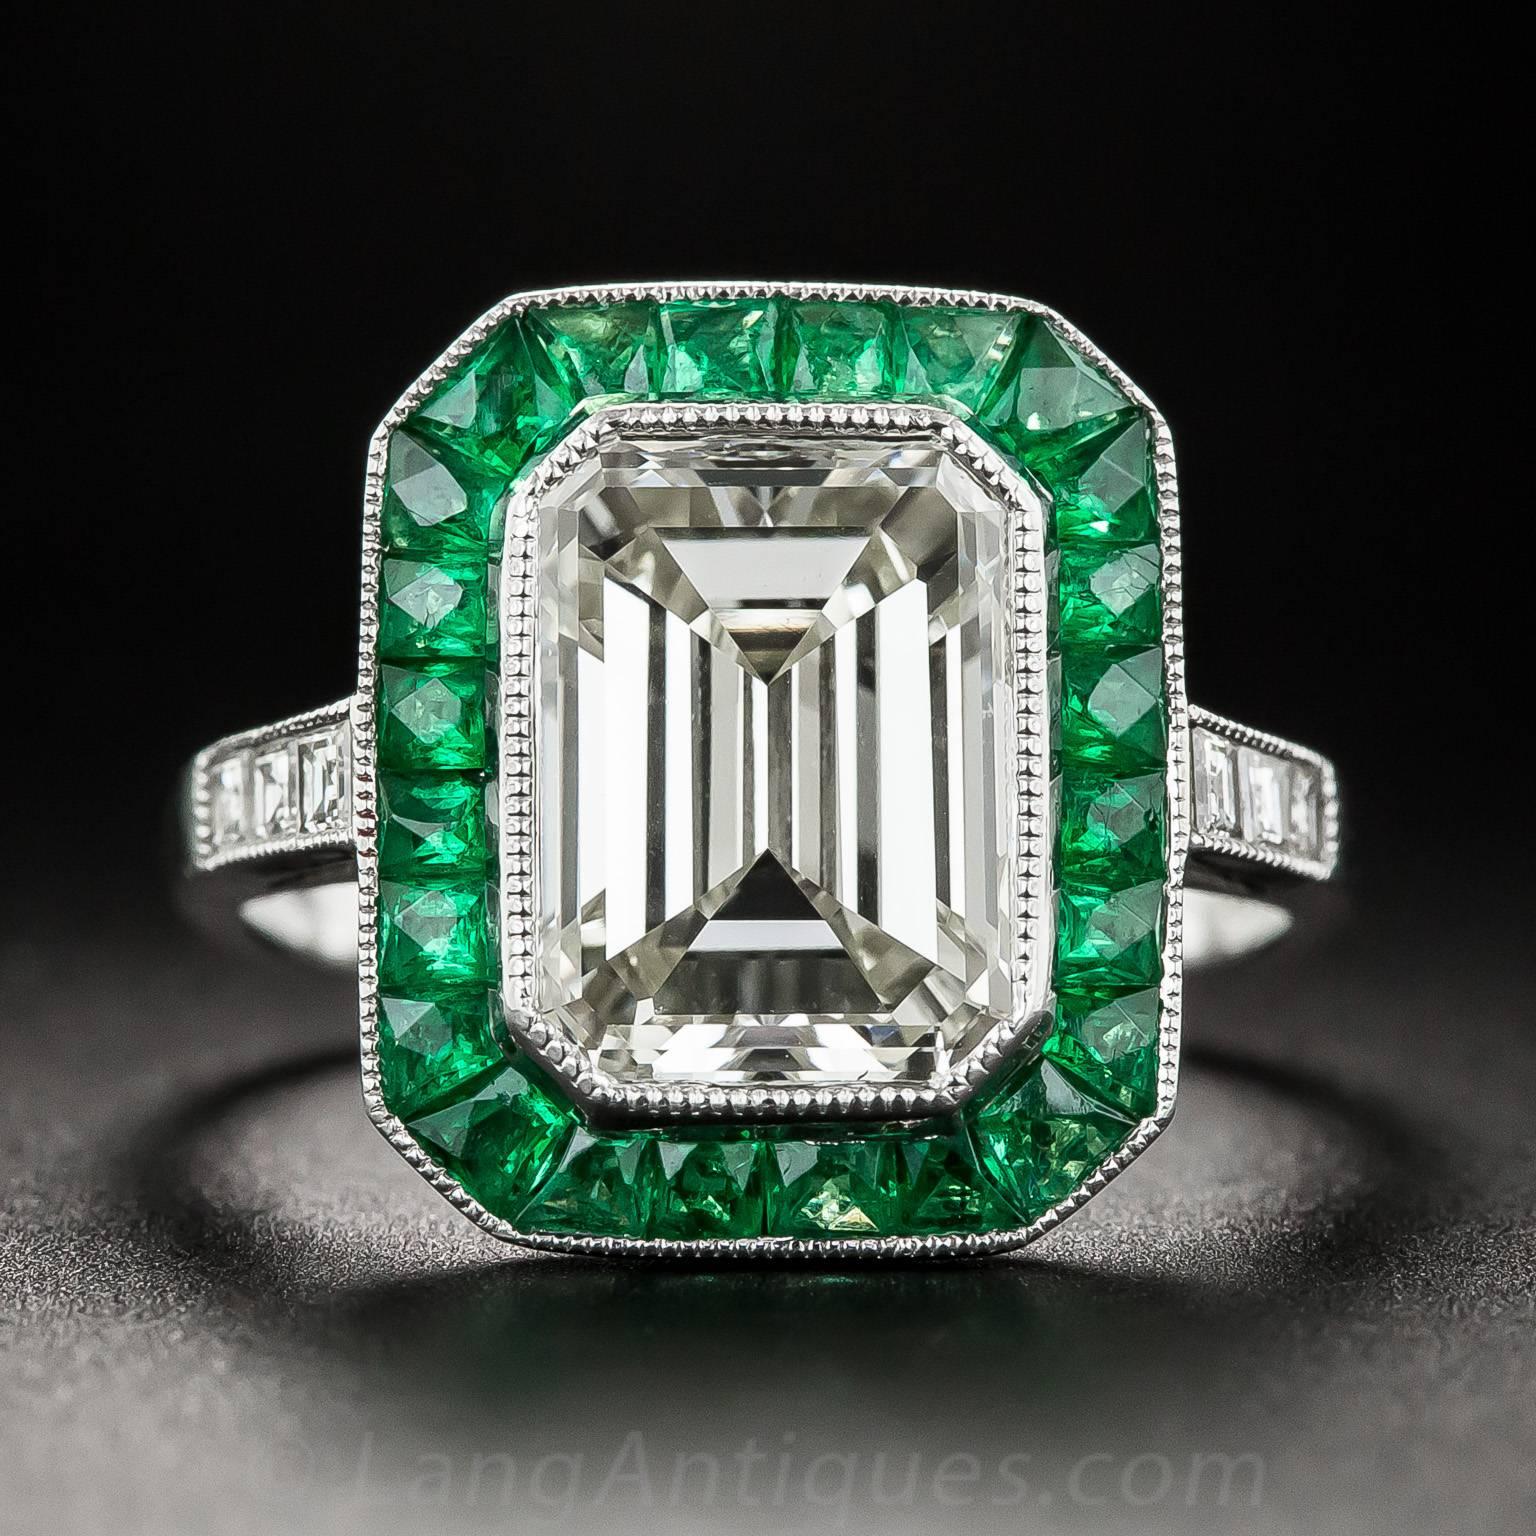 A truly stunning and sensational new Art Deco style engagement ring, finely hand-fabricated in in platinum, starring a bright and shining emerald-cut diamond weighing 3.00 carat. The gorgeous stone is dramatically framed by vibrant green faceted